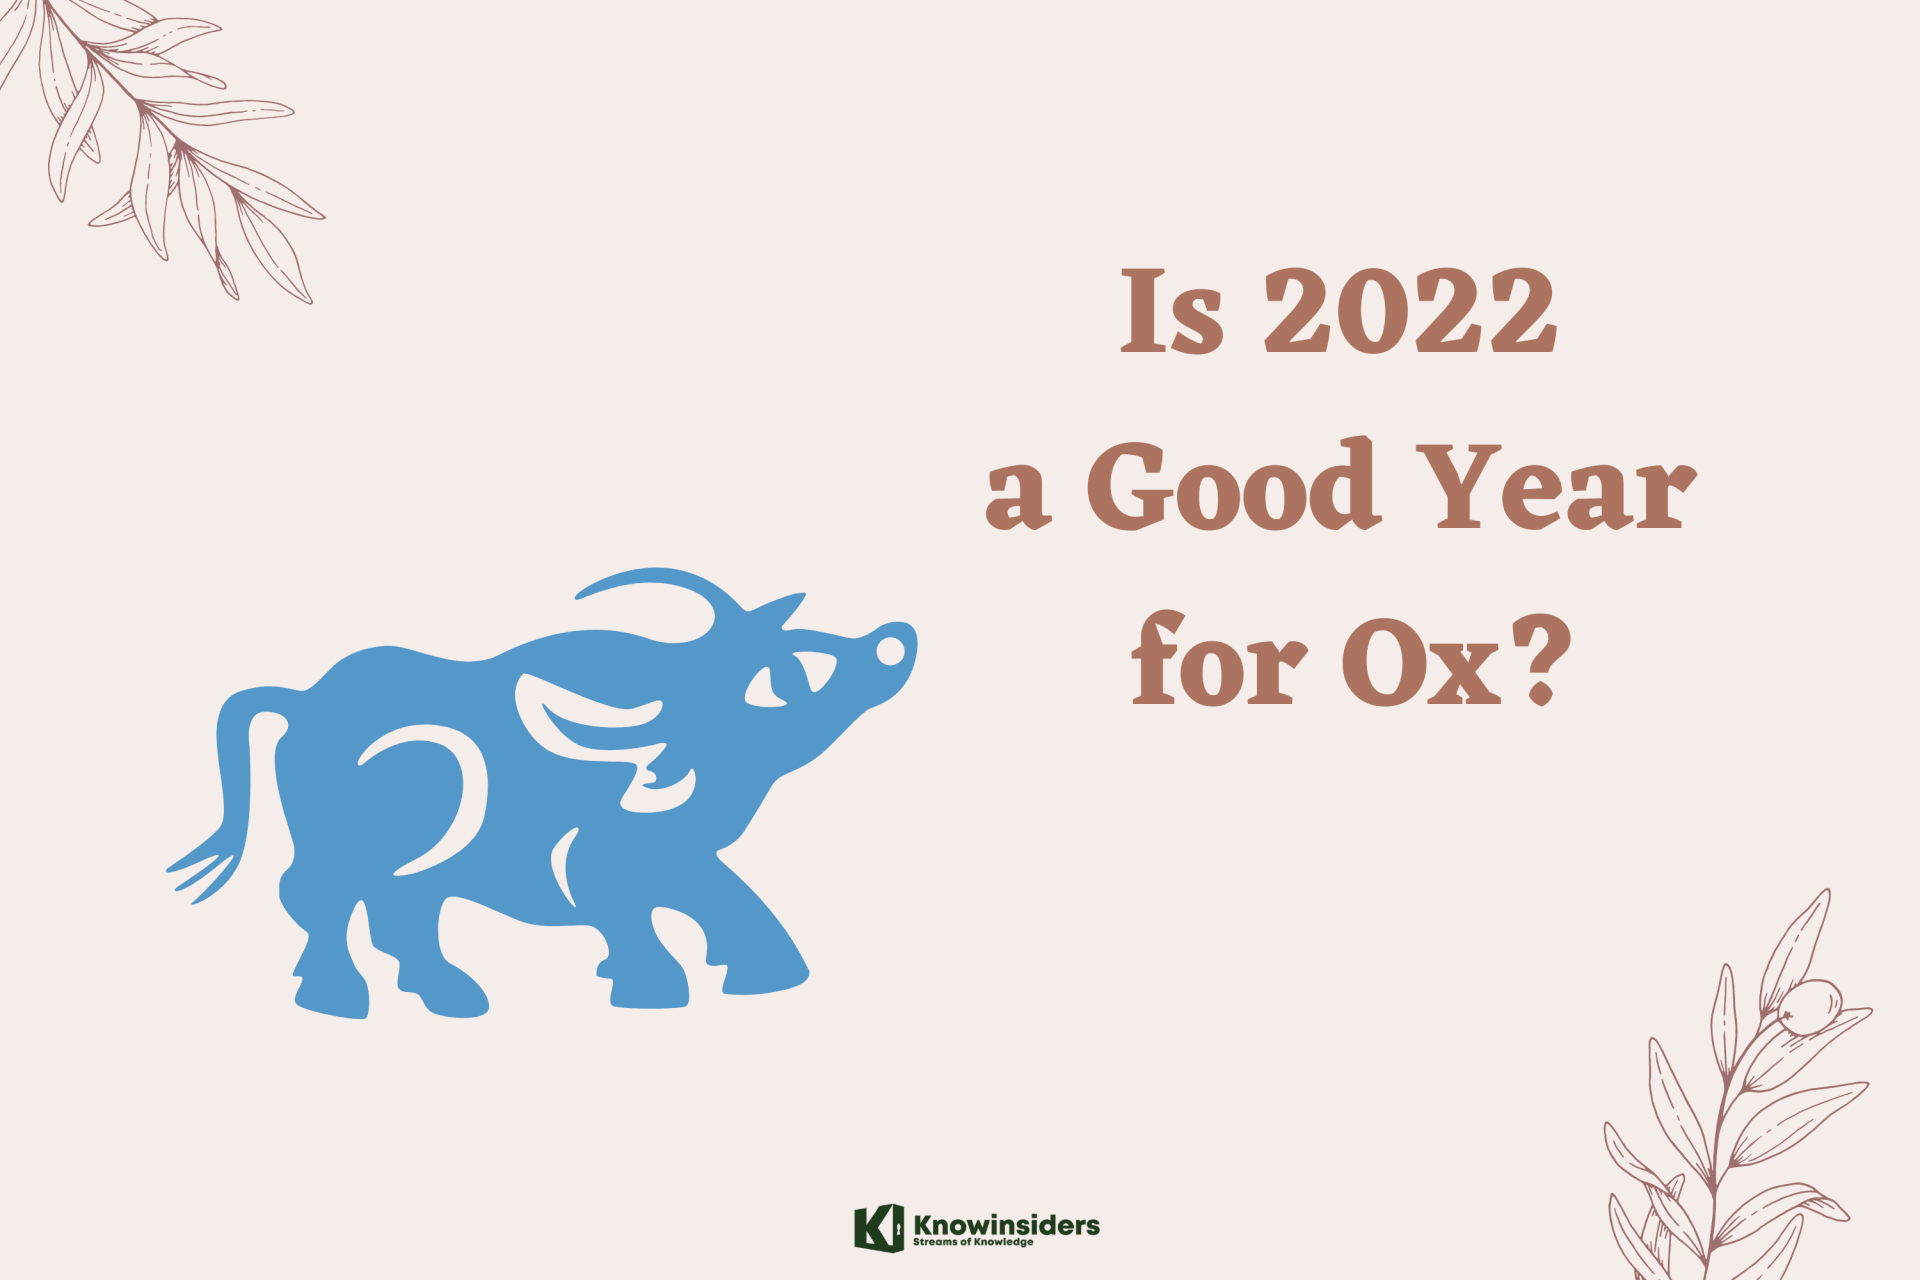 Is 2022 A Good Year for Ox?